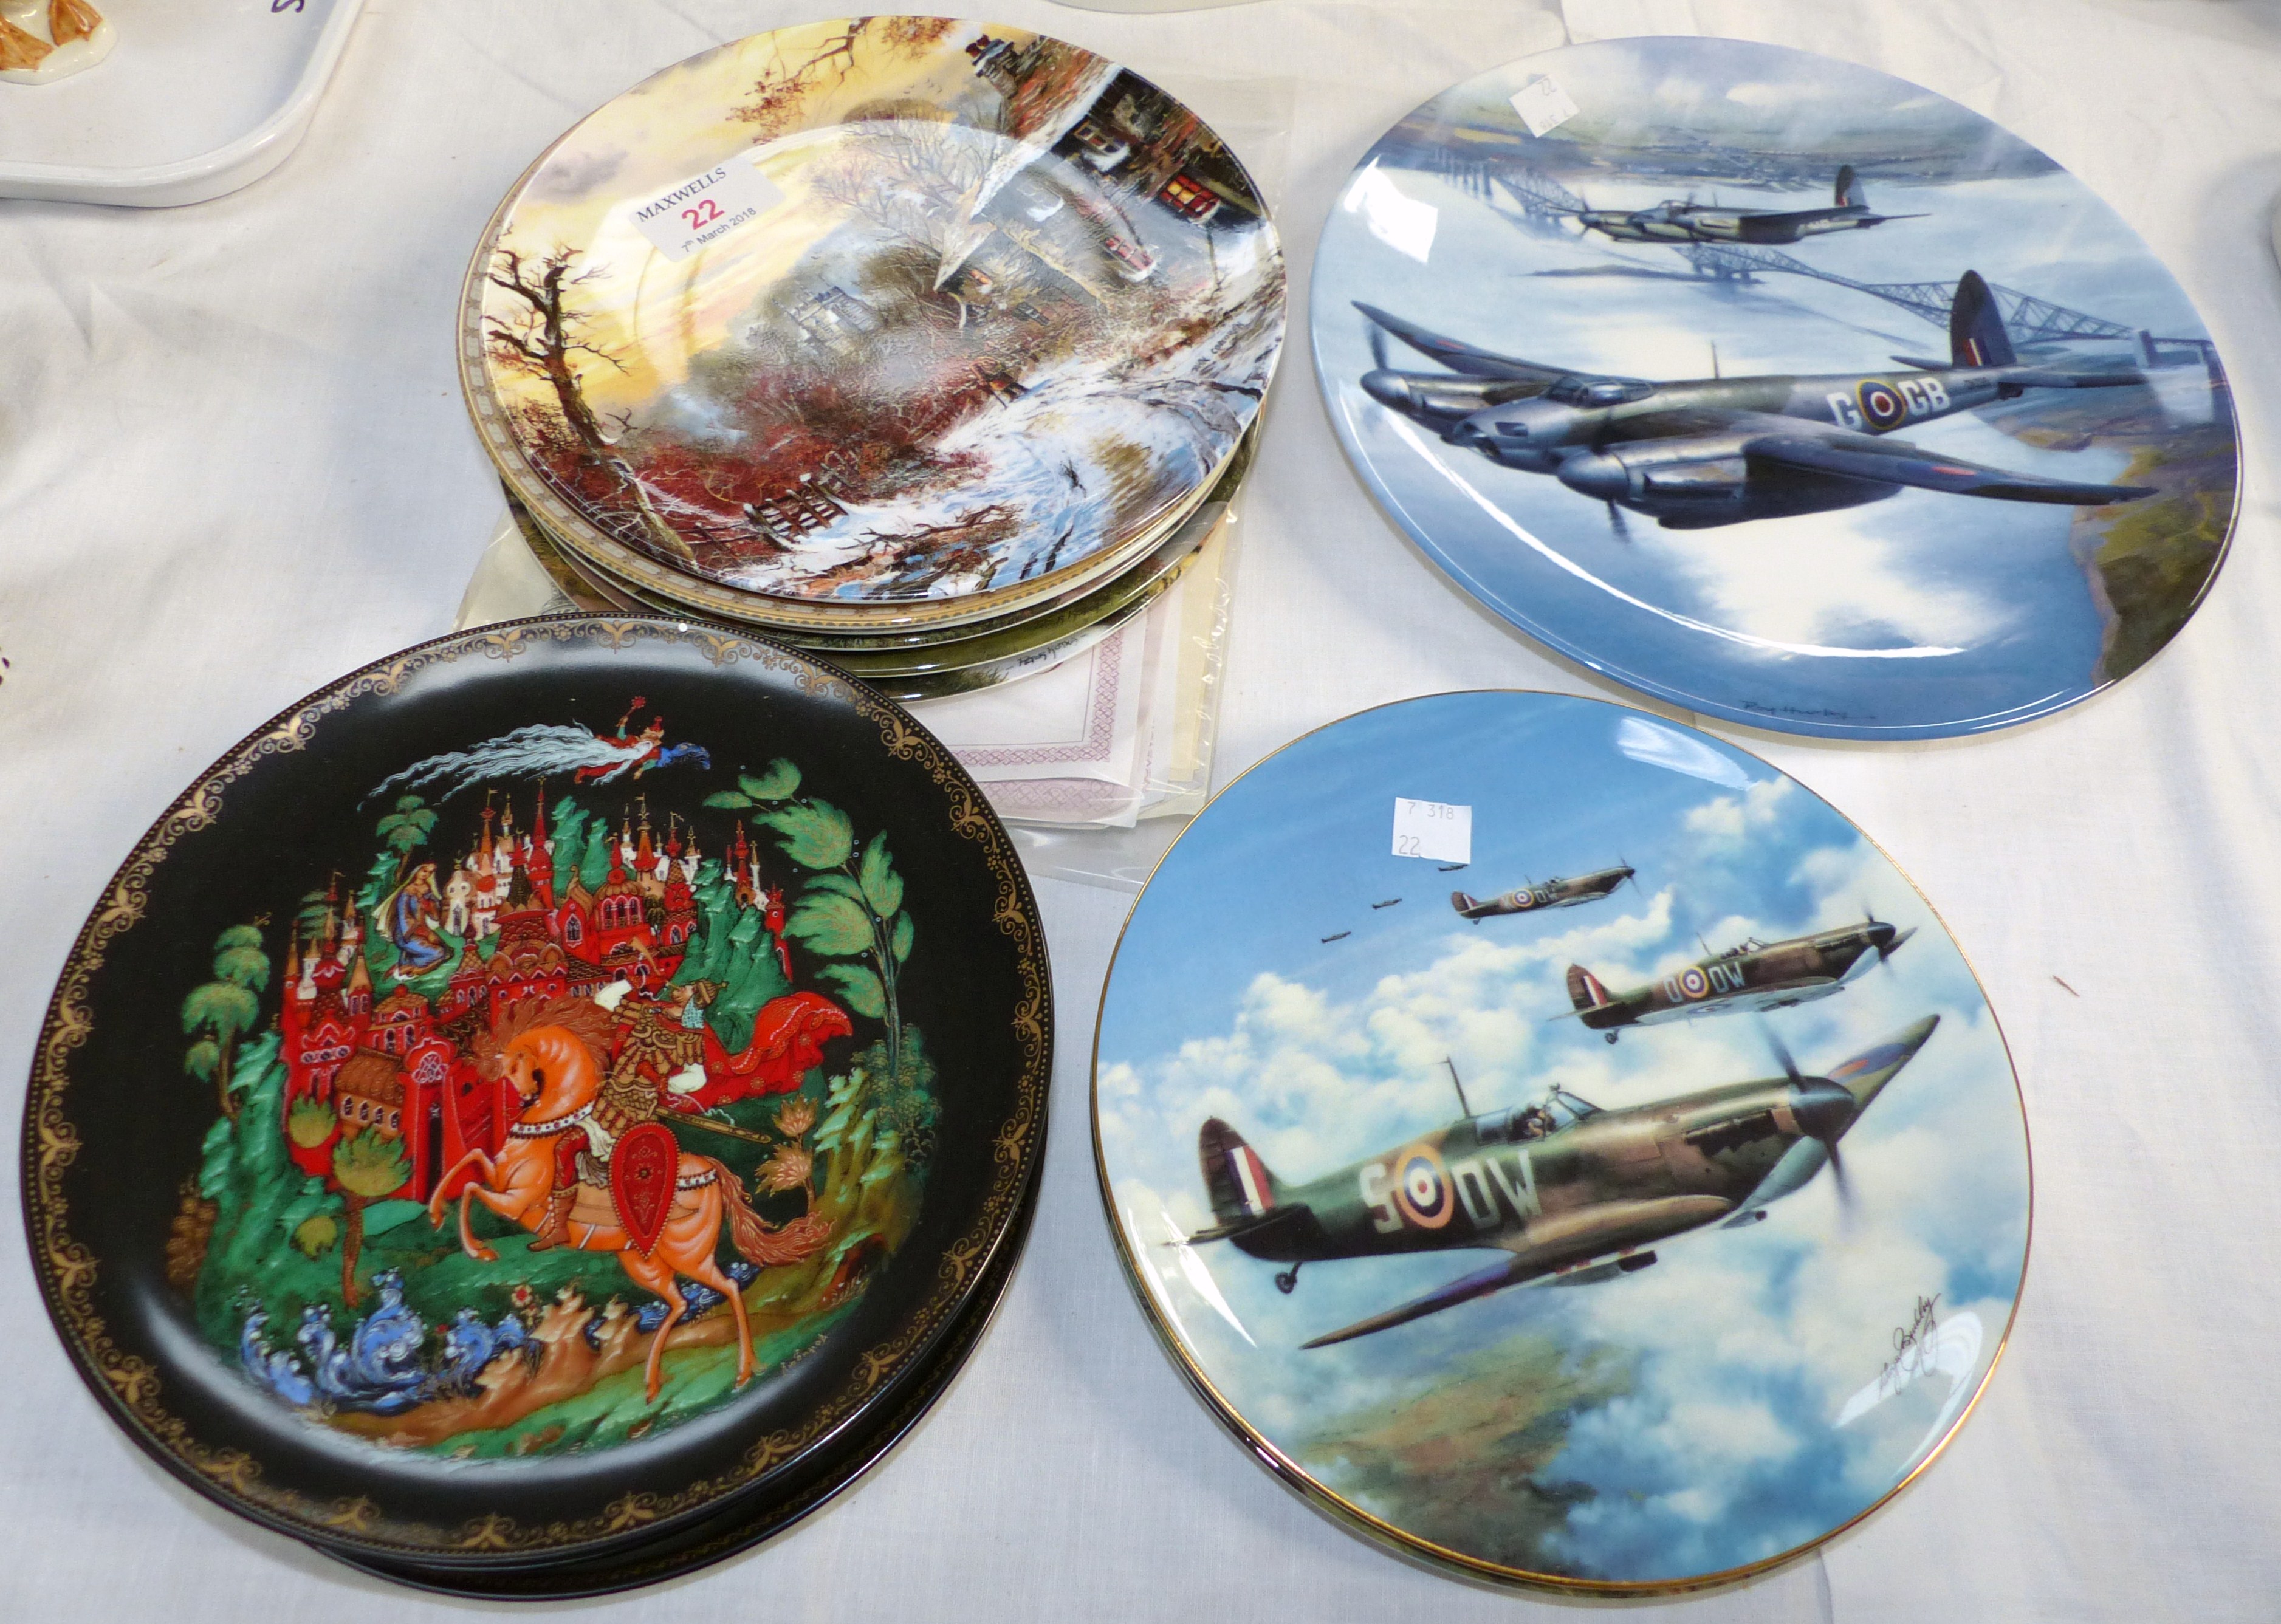 A set of 6 Royal Albert Collector's plates - ''As once they worked the land''; a set of 5 Russian